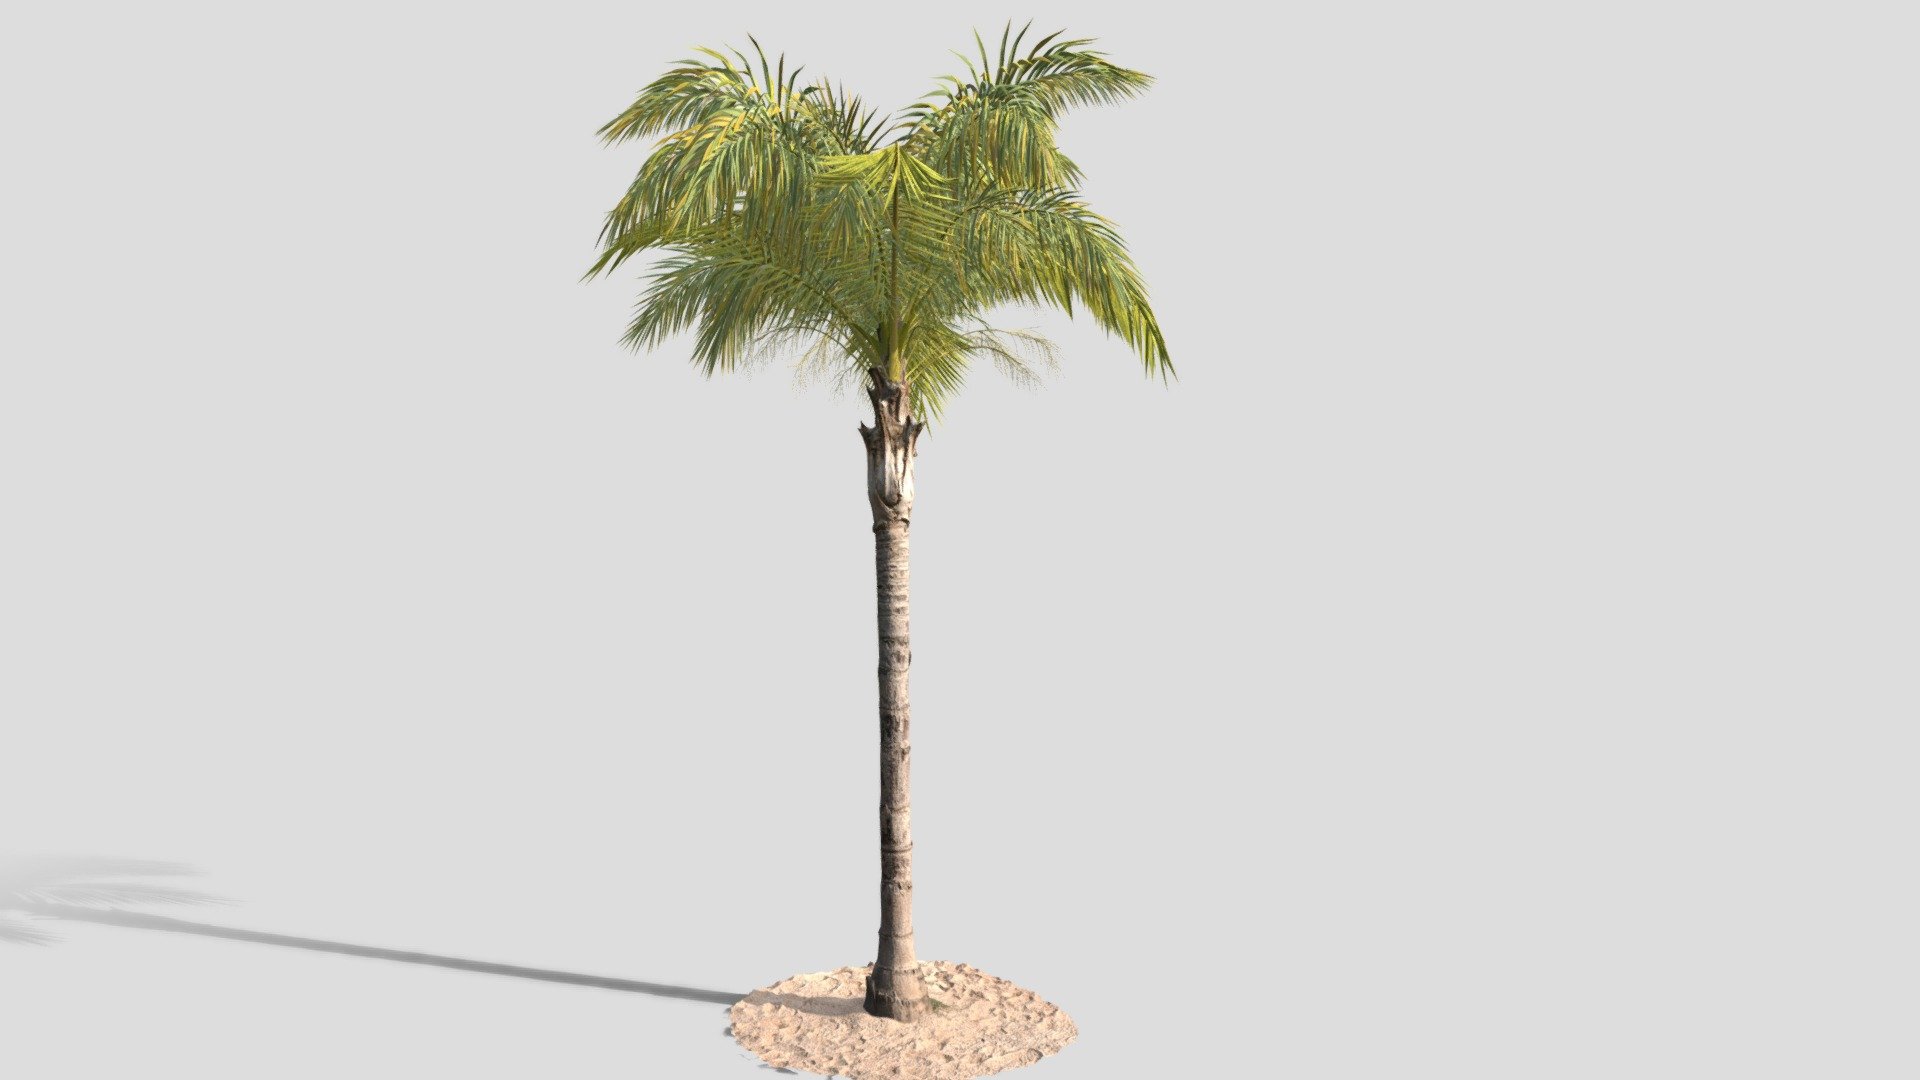 GOBOTREE

A high quality 3d model of a mature queen palm C (syagrus_romanzoffiana).

| Model features a scanned real tree parts for hyper-real renders

| Model dimensions : 5.75m5.67m9.31m

| Mesh details – 664,335 faces , 388,846 vertices

| It comes with PBR ready textures - Diffuse, Albedo, AO, Metalness /Specular, Normal, Roughness maps. Other formats available upon request.

| Formats 3ds max 2015 with a Vray materials FBX ABC Clarisse OBJ

Object suitable for architectural and landscape visualisations and presentations. Please let us know, if we can improve our models or if you need us to adapt to specific needs!

We take custom orders for specific species!

Find more assets on Gobotree.com! - GTV queen palm mature C - Buy Royalty Free 3D model by Gobotree-3D-Assets 3d model